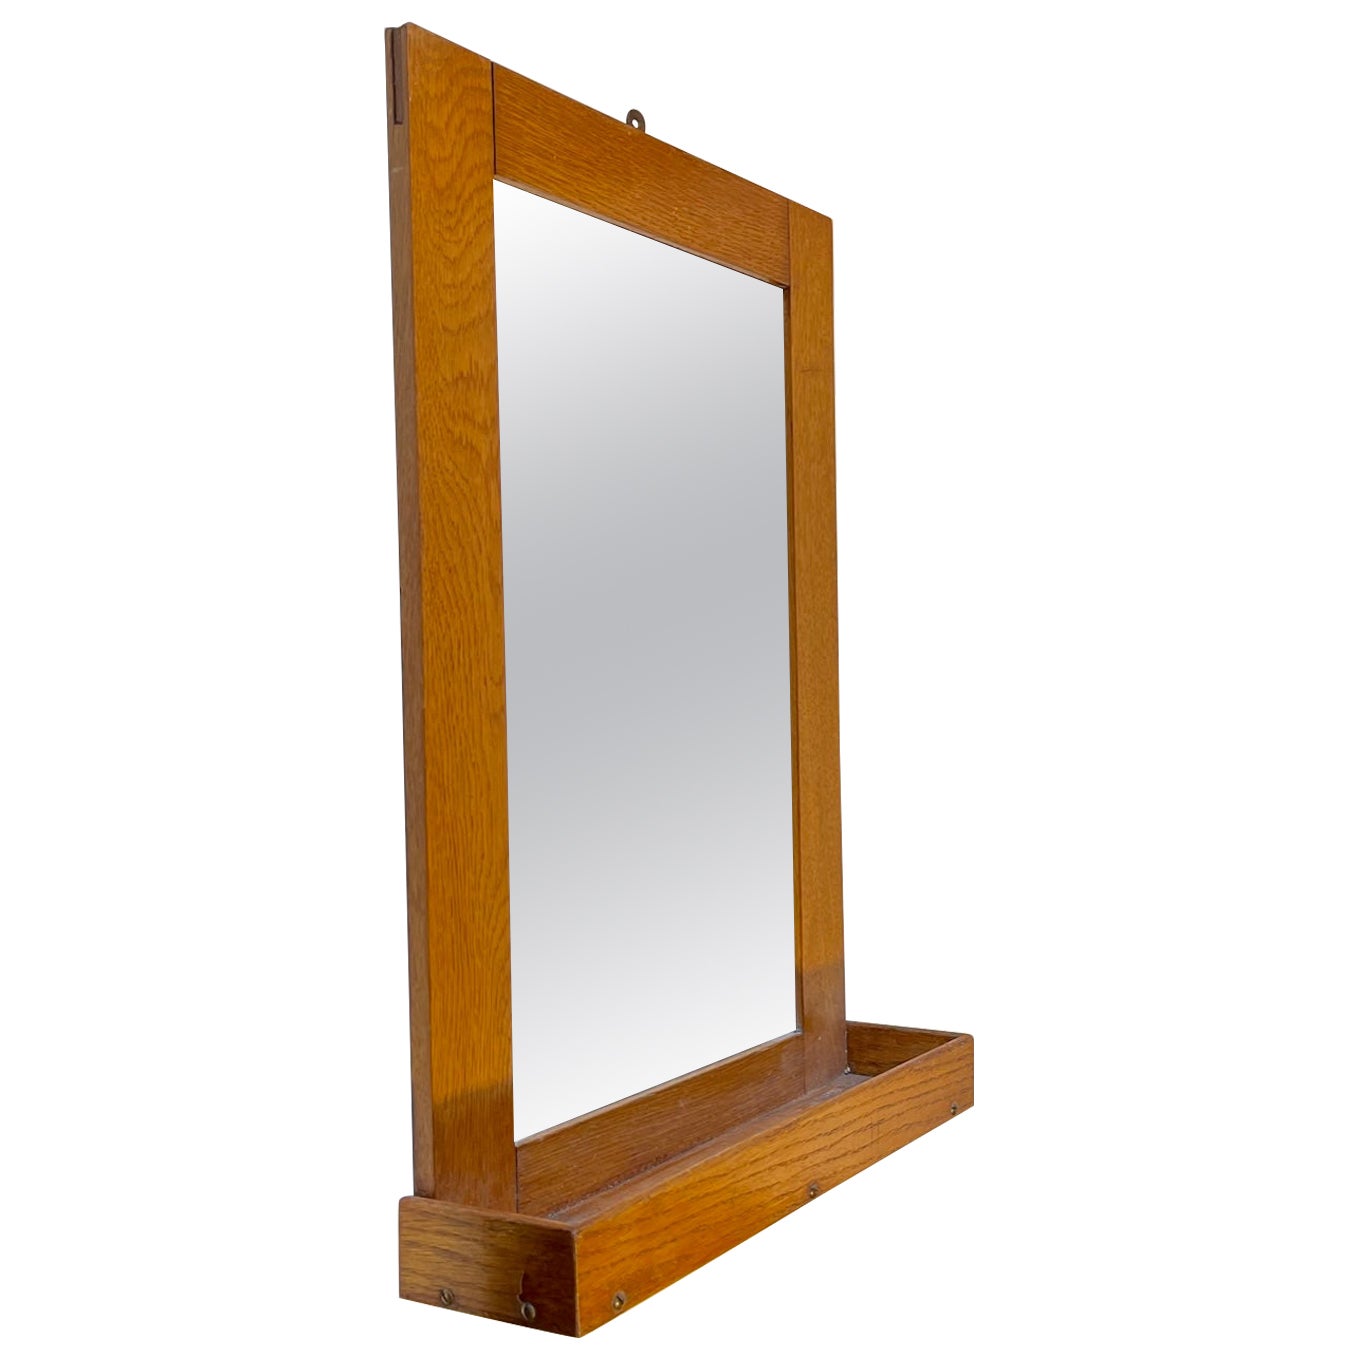 Small Nautical Cabin Oak Wall Mirror with Shelf, Danish Navy, 1930s For Sale